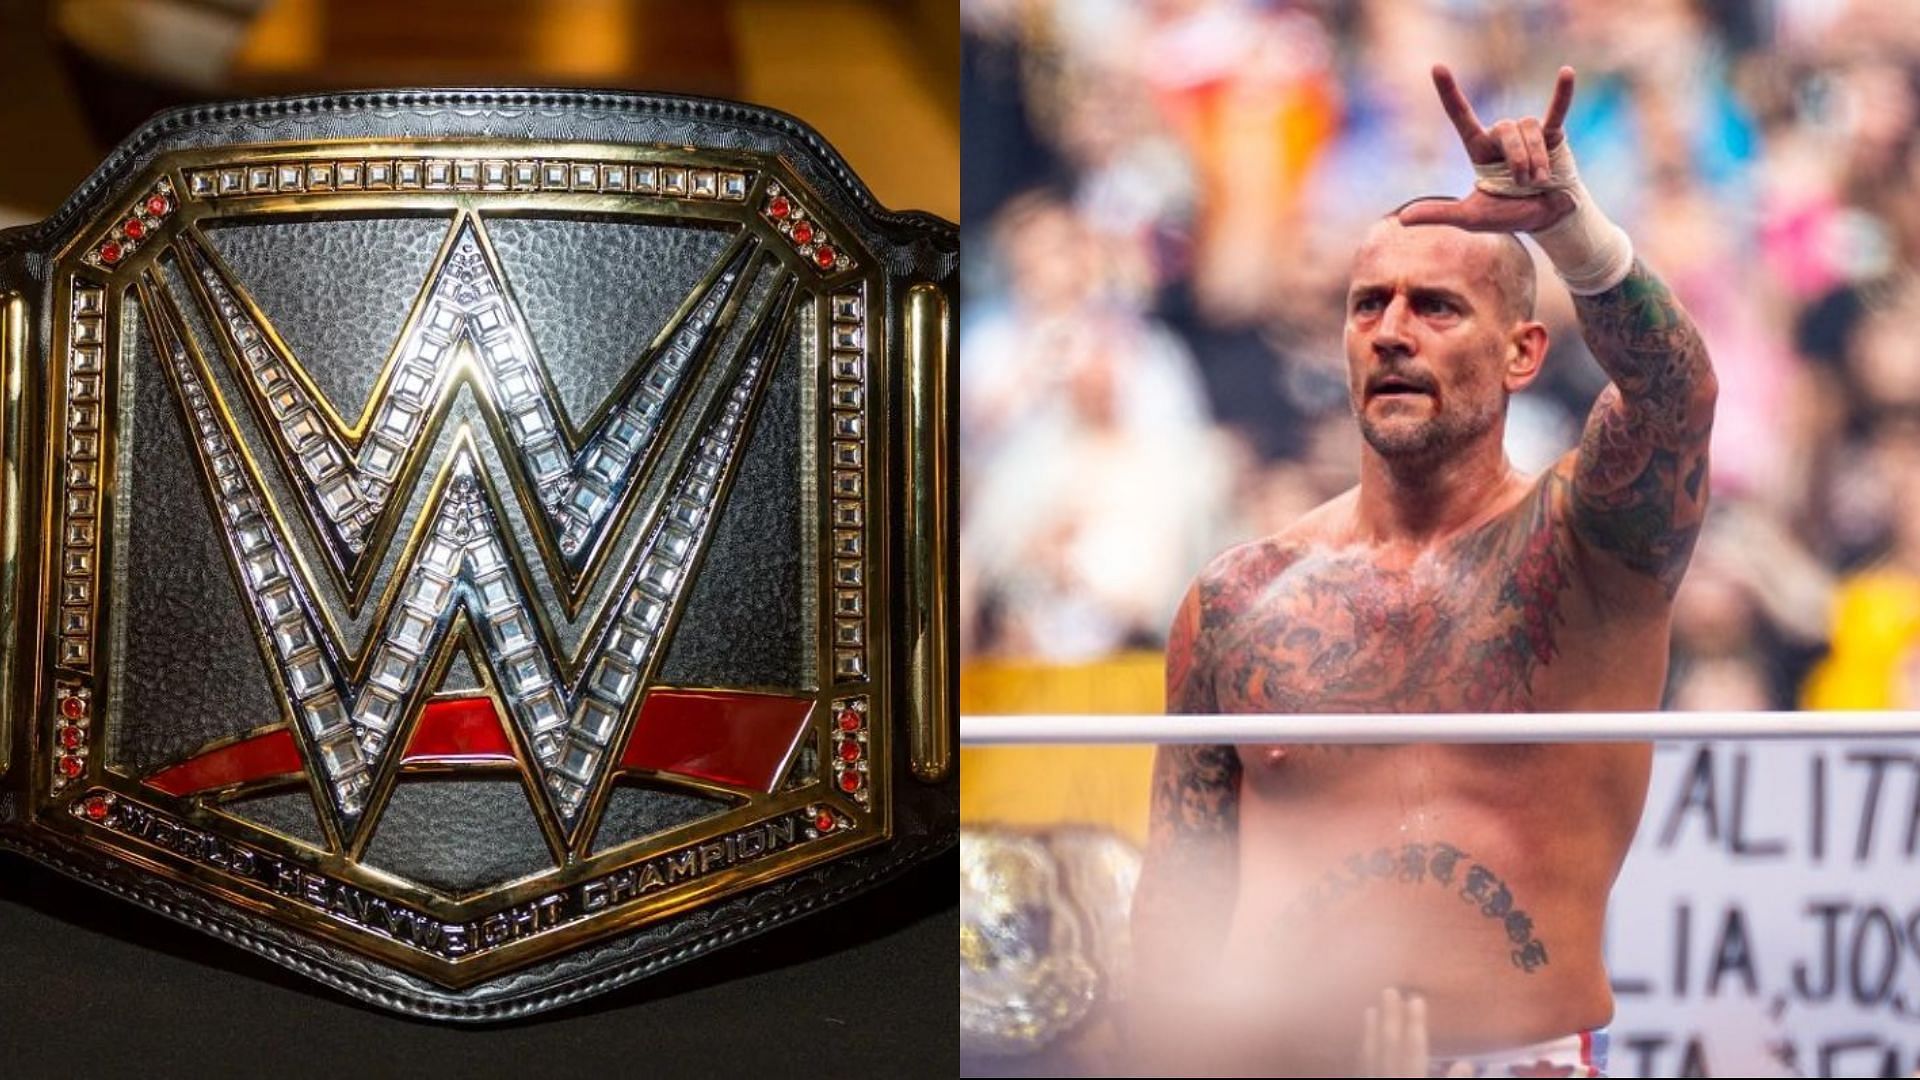 The WWE Championship and CM Punk